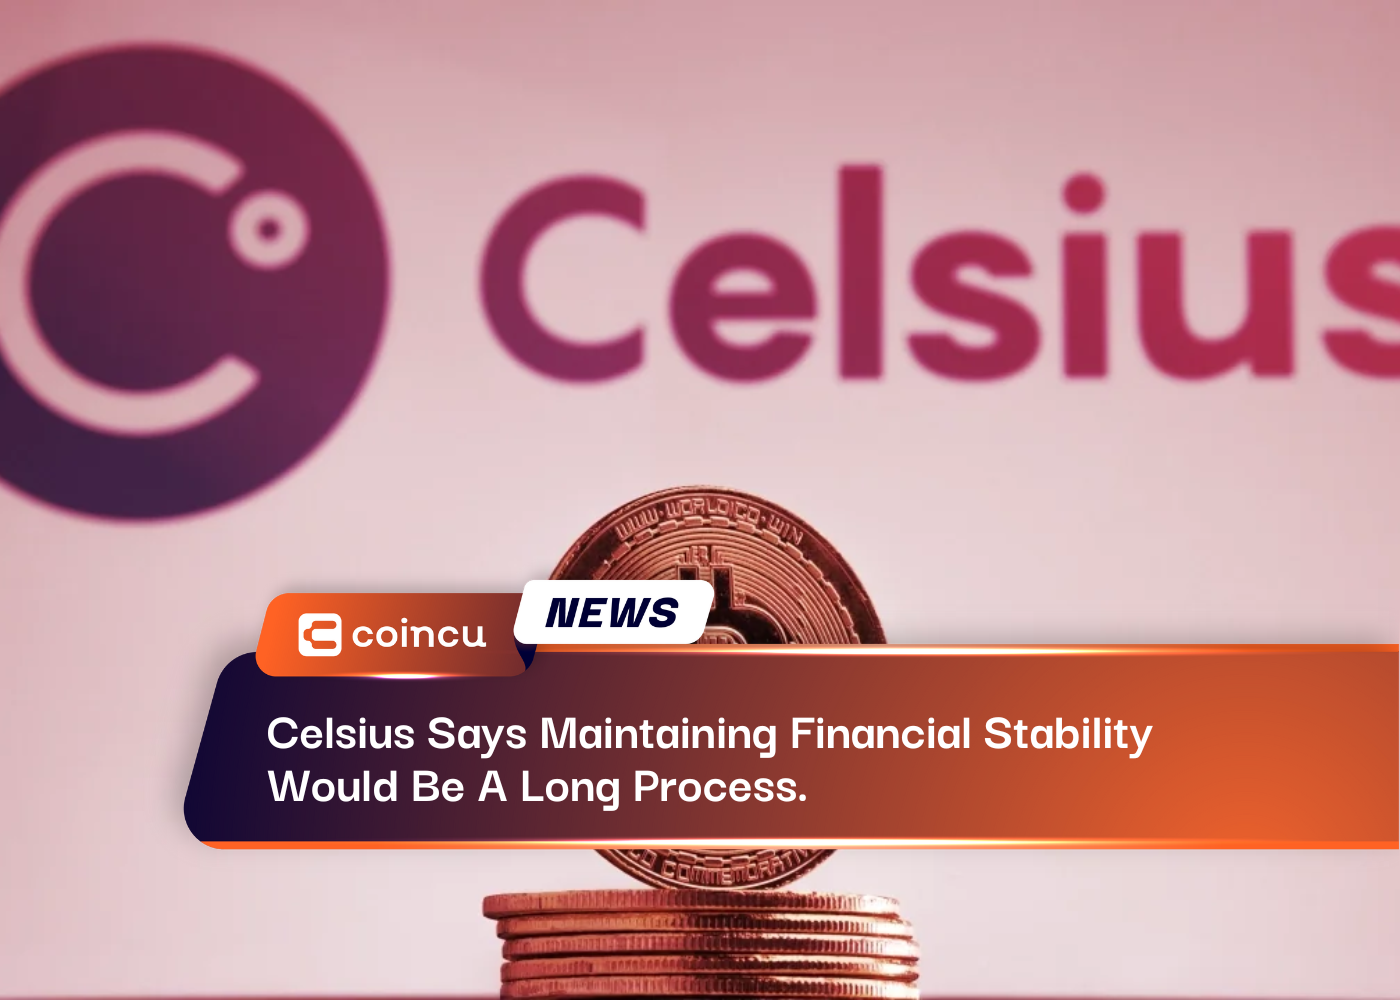 Celsius Says Maintaining Financial Stability Would Be A Long Process.